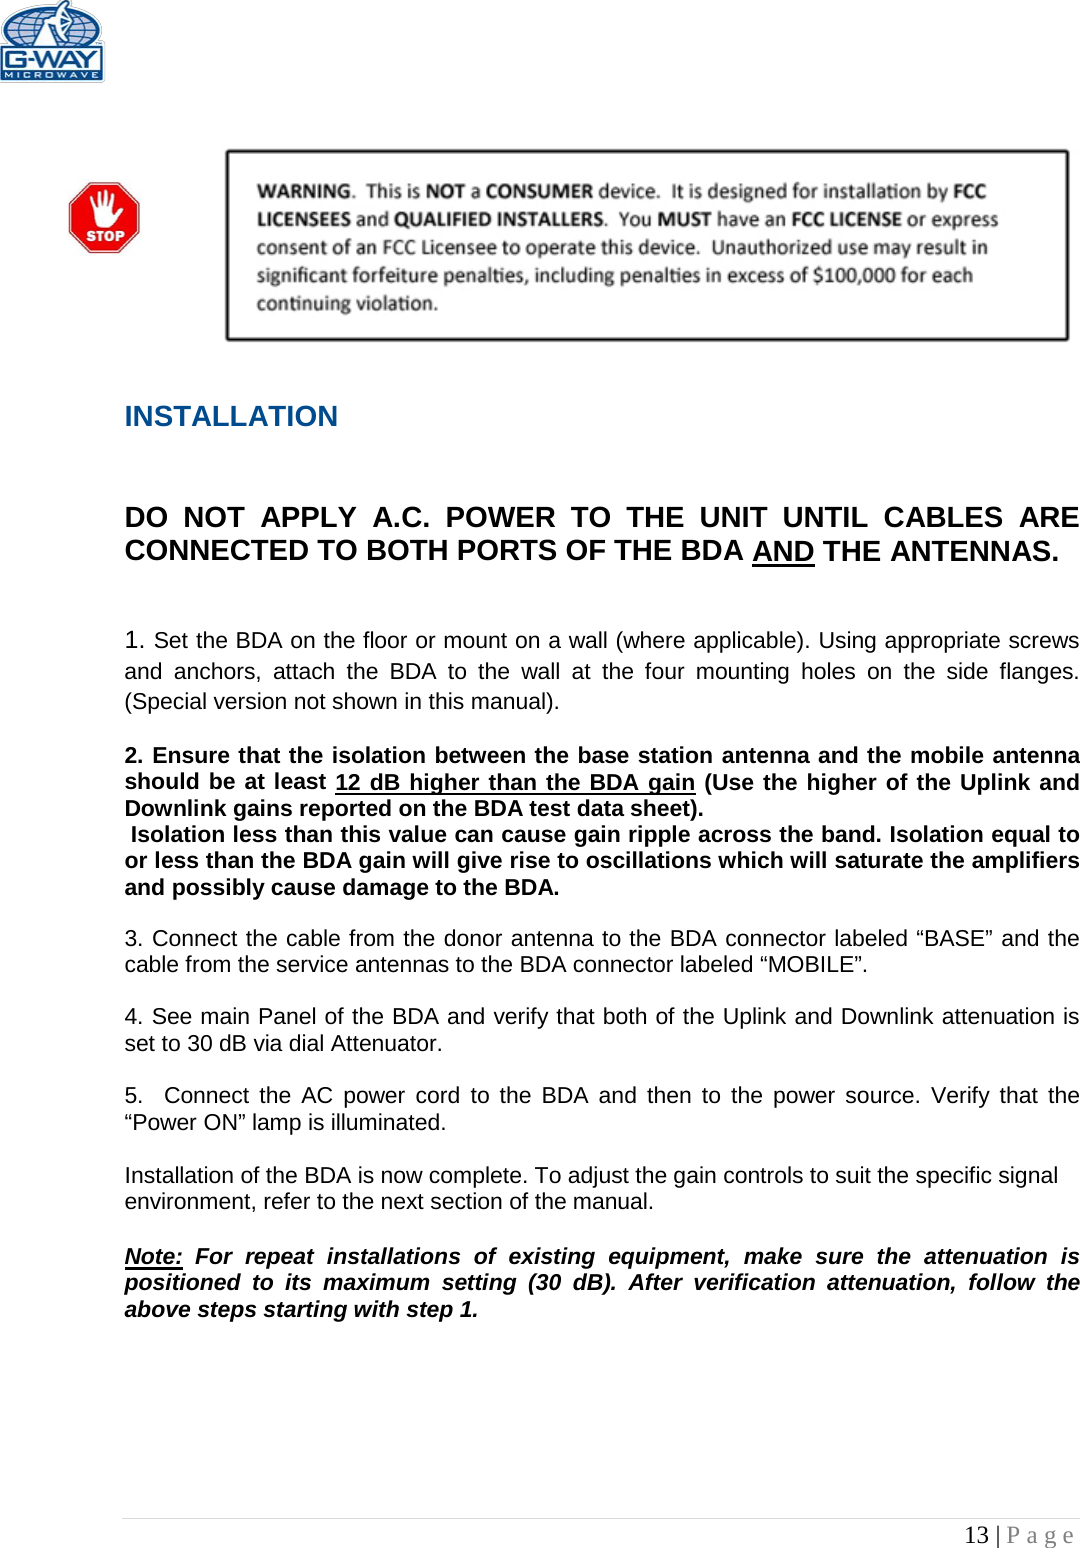   13 | Page     INSTALLATION   DO NOT APPLY A.C. POWER TO THE UNIT UNTIL CABLES ARE CONNECTED TO BOTH PORTS OF THE BDA AND THE ANTENNAS.    1. Set the BDA on the floor or mount on a wall (where applicable). Using appropriate screws and anchors, attach the BDA to the wall at the four mounting holes on the side flanges. (Special version not shown in this manual).  2. Ensure that the isolation between the base station antenna and the mobile antenna should be at least 12 dB higher than the BDA gain (Use the higher of the Uplink and Downlink gains reported on the BDA test data sheet).  Isolation less than this value can cause gain ripple across the band. Isolation equal to or less than the BDA gain will give rise to oscillations which will saturate the amplifiers and possibly cause damage to the BDA.   3. Connect the cable from the donor antenna to the BDA connector labeled “BASE” and the cable from the service antennas to the BDA connector labeled “MOBILE”.  4. See main Panel of the BDA and verify that both of the Uplink and Downlink attenuation is set to 30 dB via dial Attenuator.    5.  Connect the AC power cord to the BDA and then to the power source. Verify that the “Power ON” lamp is illuminated.   Installation of the BDA is now complete. To adjust the gain controls to suit the specific signal environment, refer to the next section of the manual.  Note: For repeat installations of existing equipment, make sure the attenuation is positioned to its maximum setting (30 dB). After verification attenuation, follow the above steps starting with step 1.      